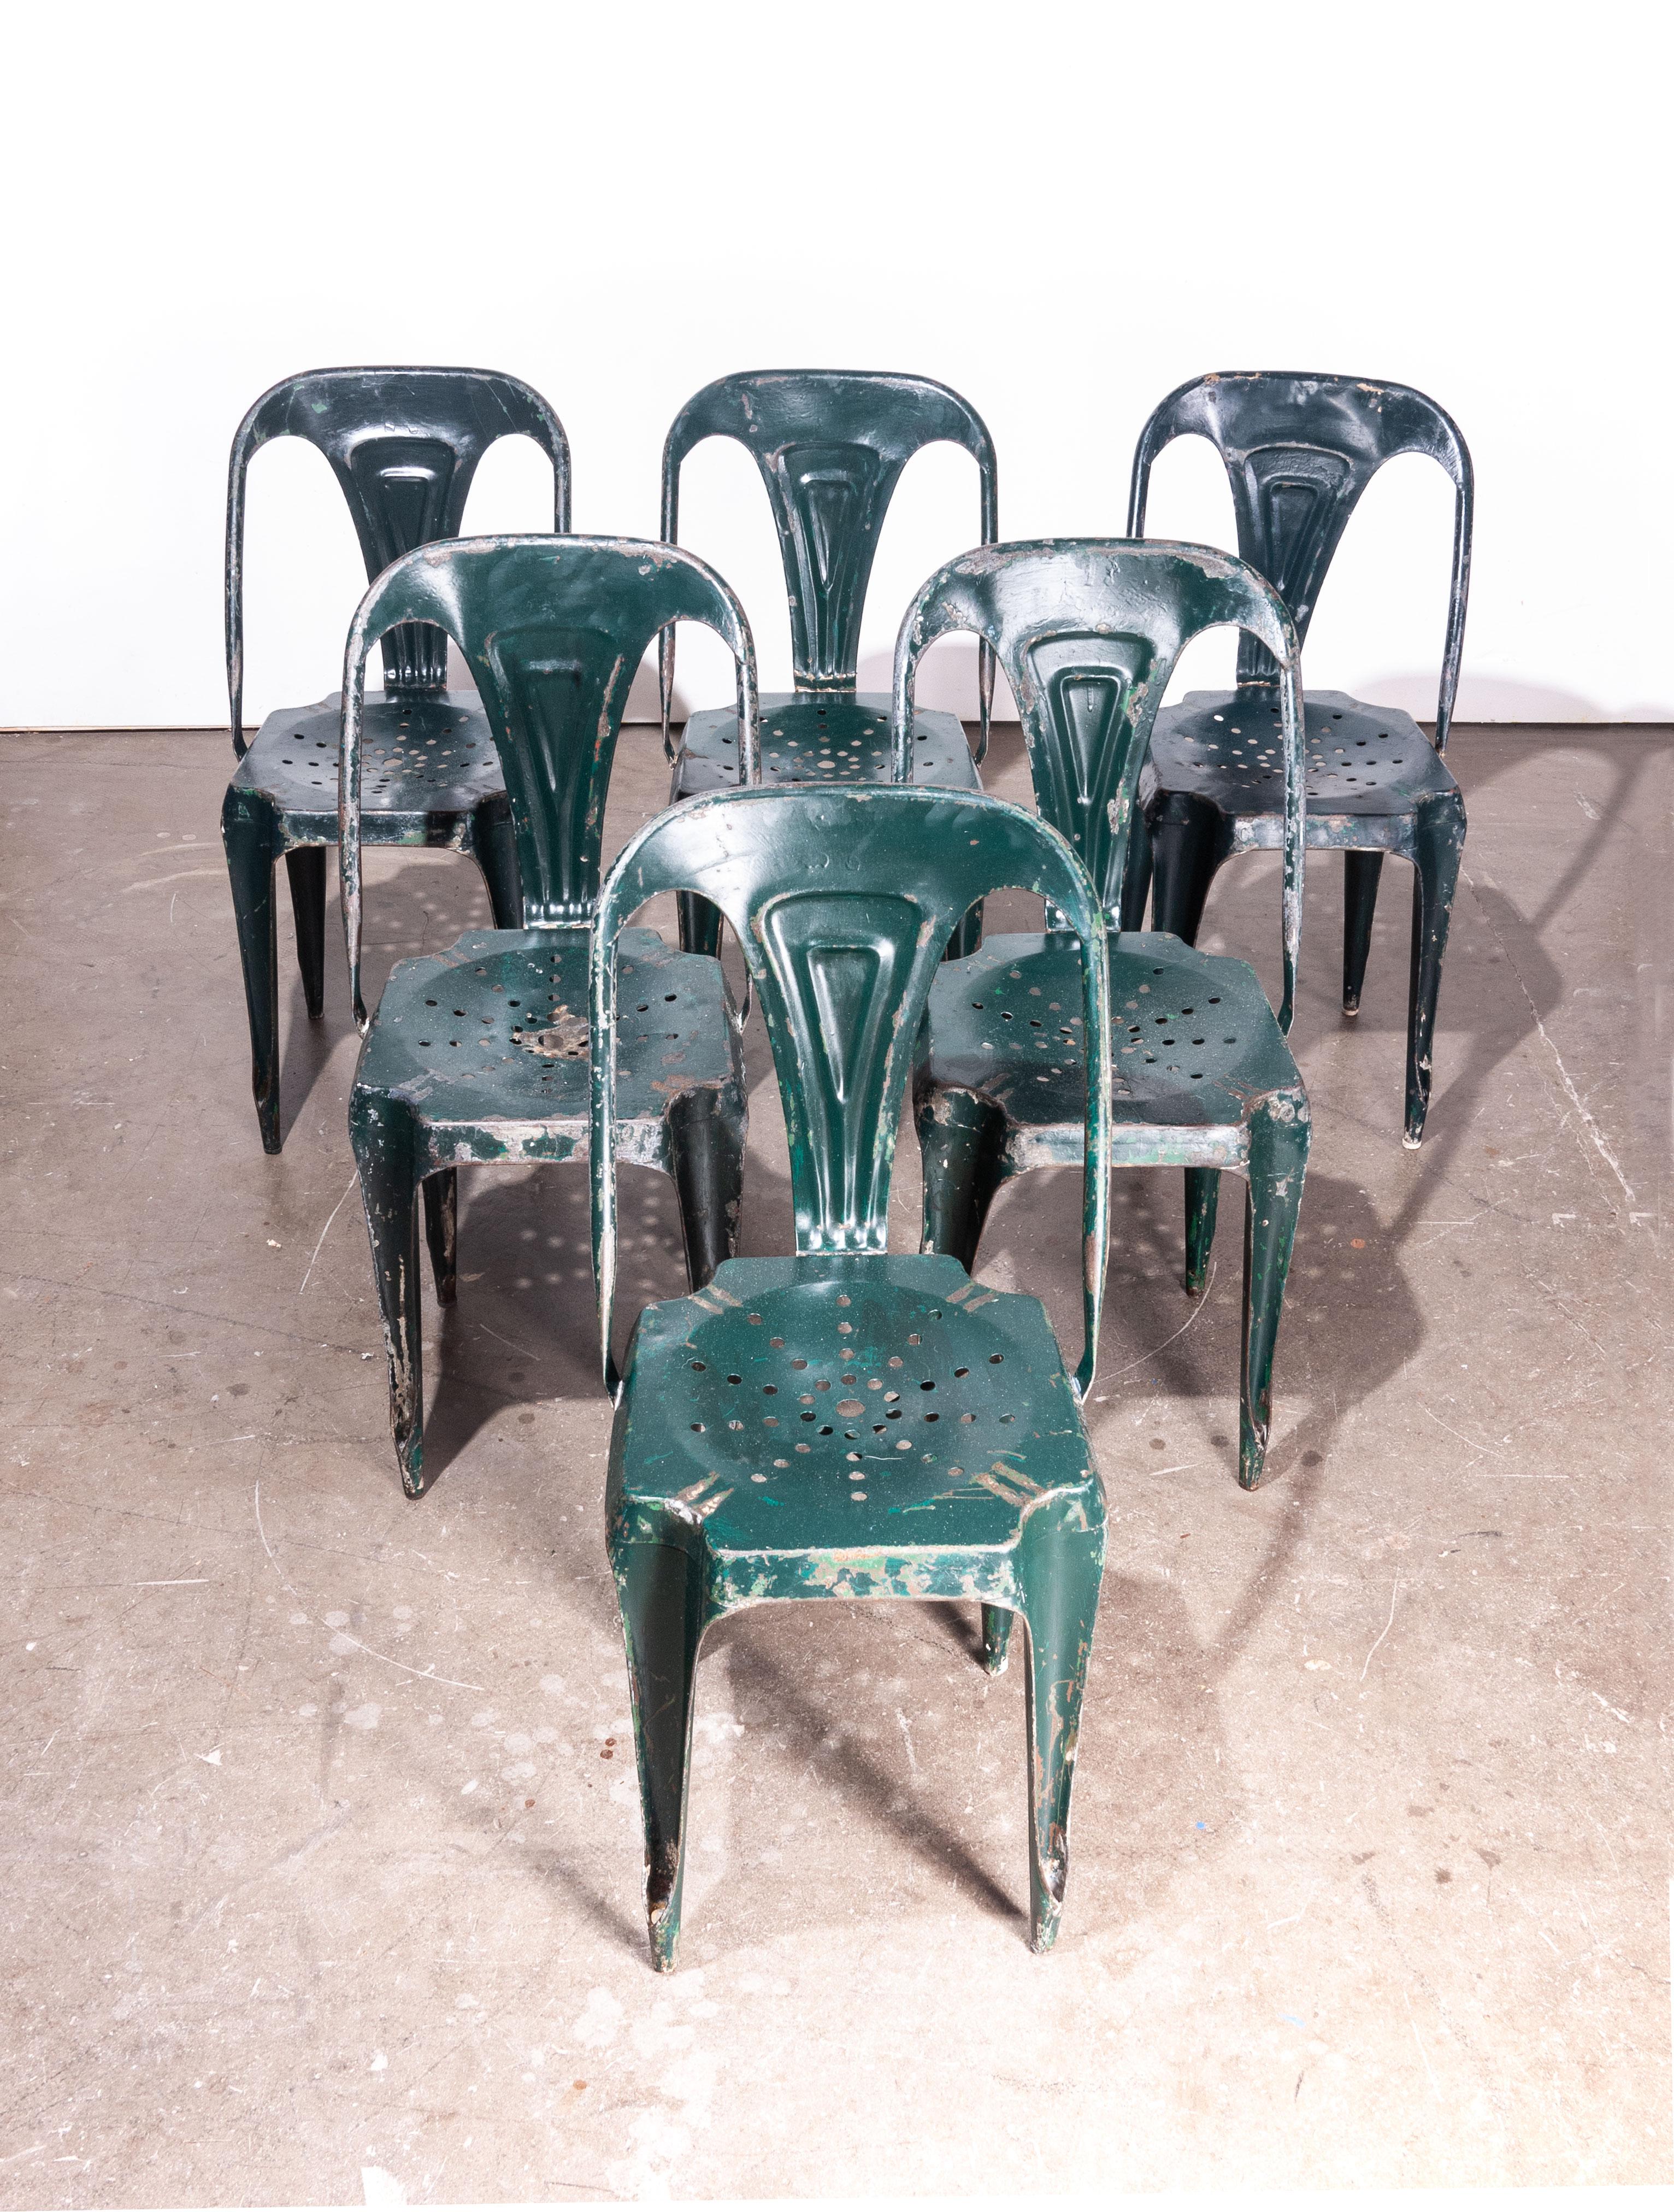 1940s original set of six French Multipl’s metal dining chairs
Rare set of six French 1940s vintage Multipl’s metal dining chairs in excellent original condition. Designed by Joseph Mathieu and made in Pierre Benite in Lyon. These chairs are an